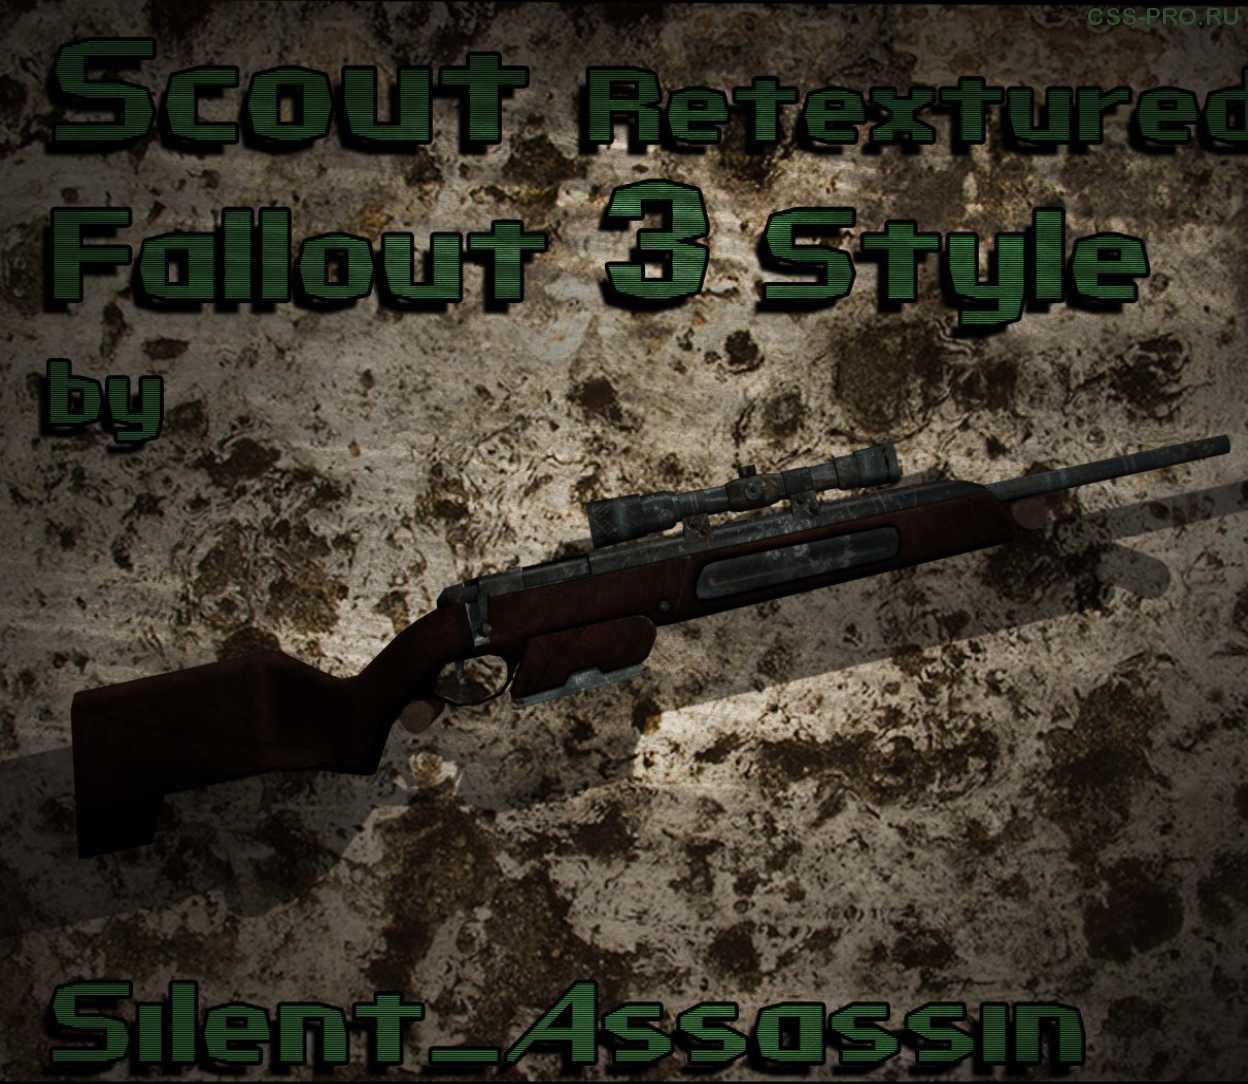 Scout FO3 style